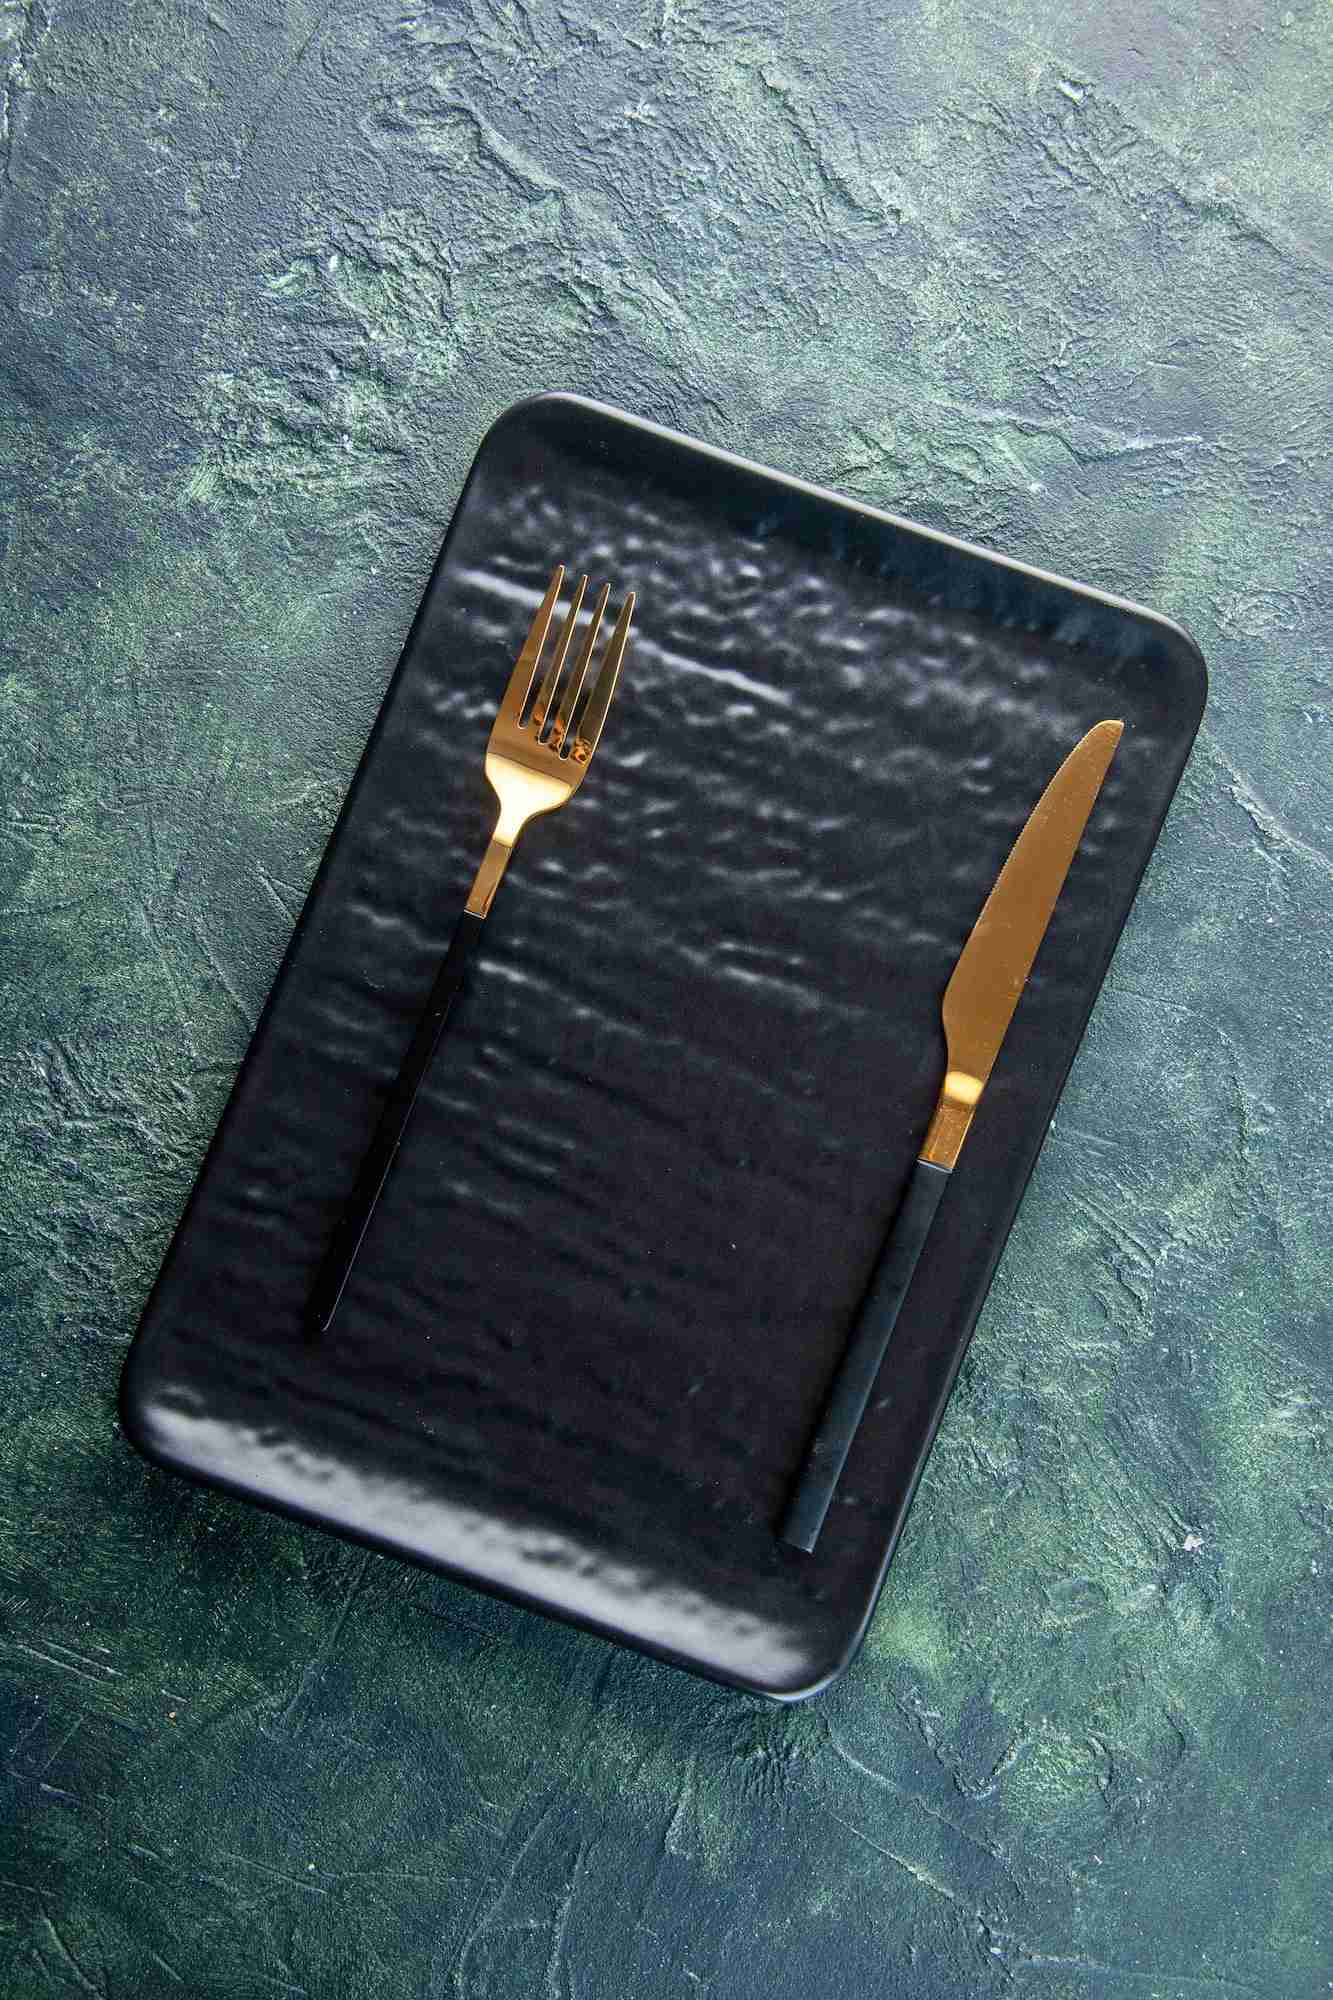 top view black plate with golden fork and knife on dark background utencil color dinner cutlery